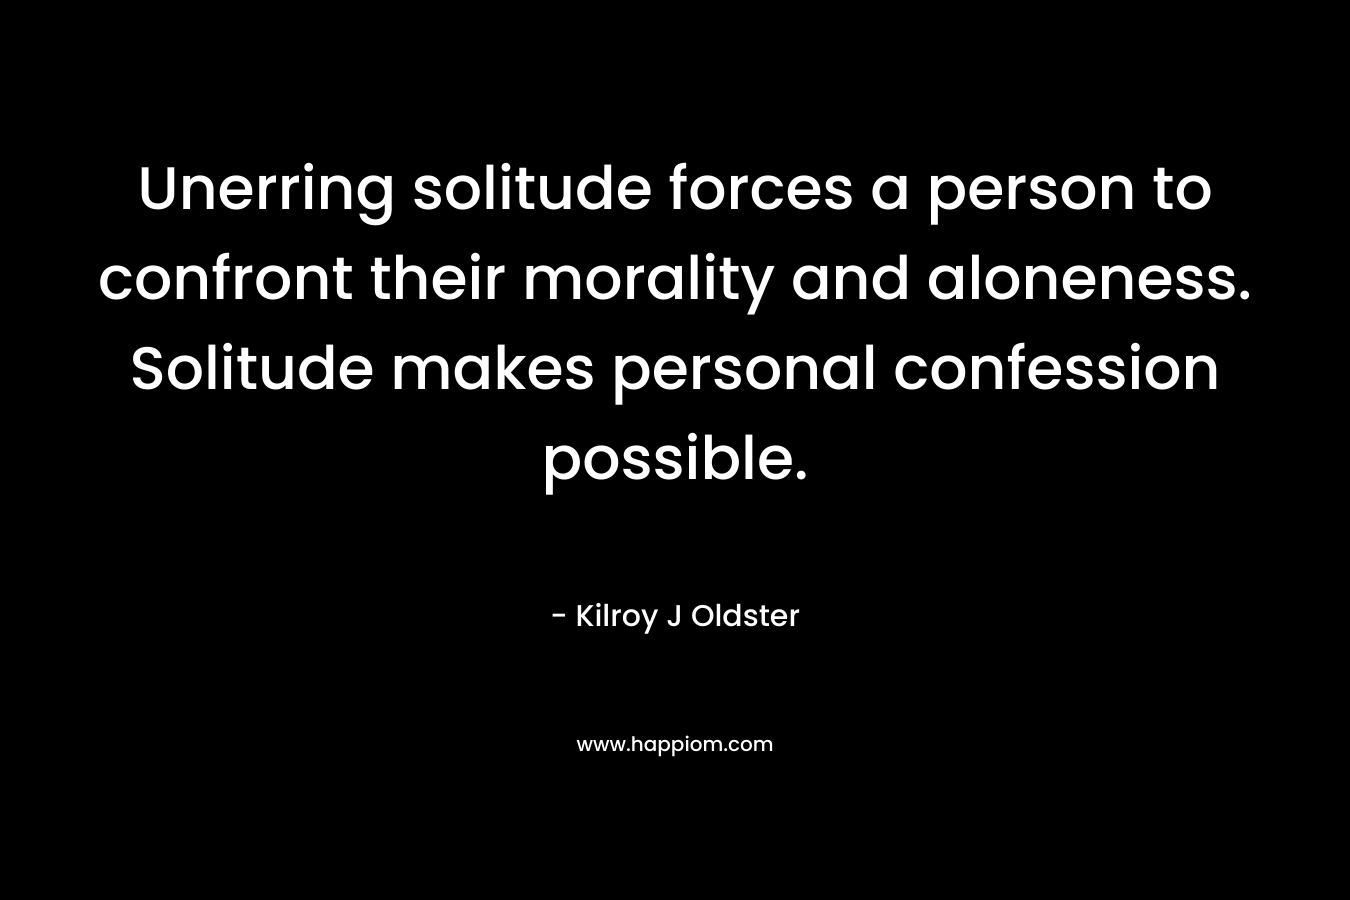 Unerring solitude forces a person to confront their morality and aloneness. Solitude makes personal confession possible.